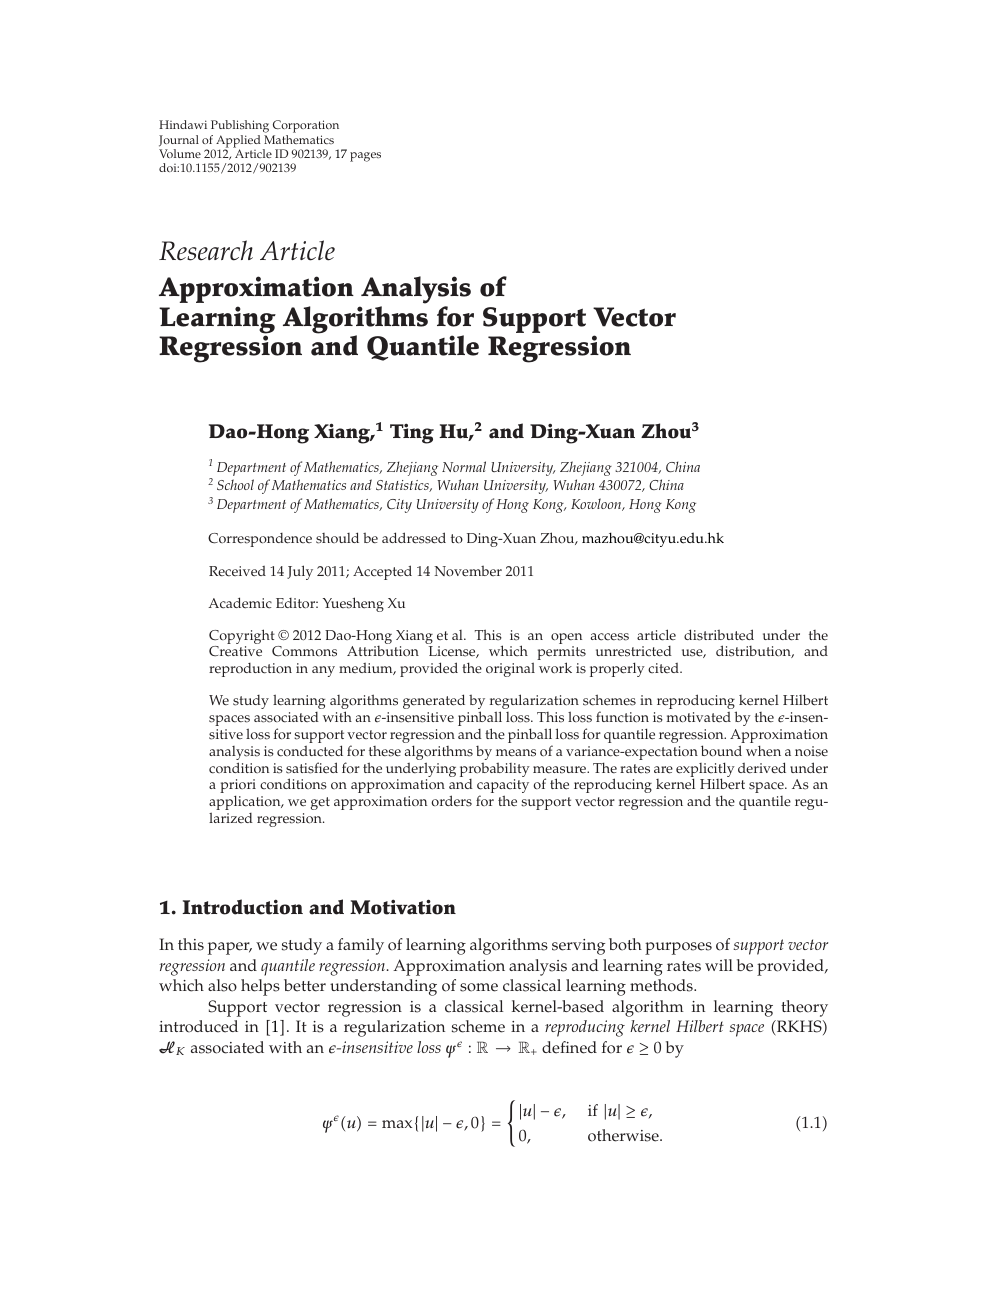 Approximation Analysis Of Learning Algorithms For Support Vector Regression And Quantile Regression Topic Of Research Paper In Mathematics Download Scholarly Article Pdf And Read For Free On Cyberleninka Open Science Hub